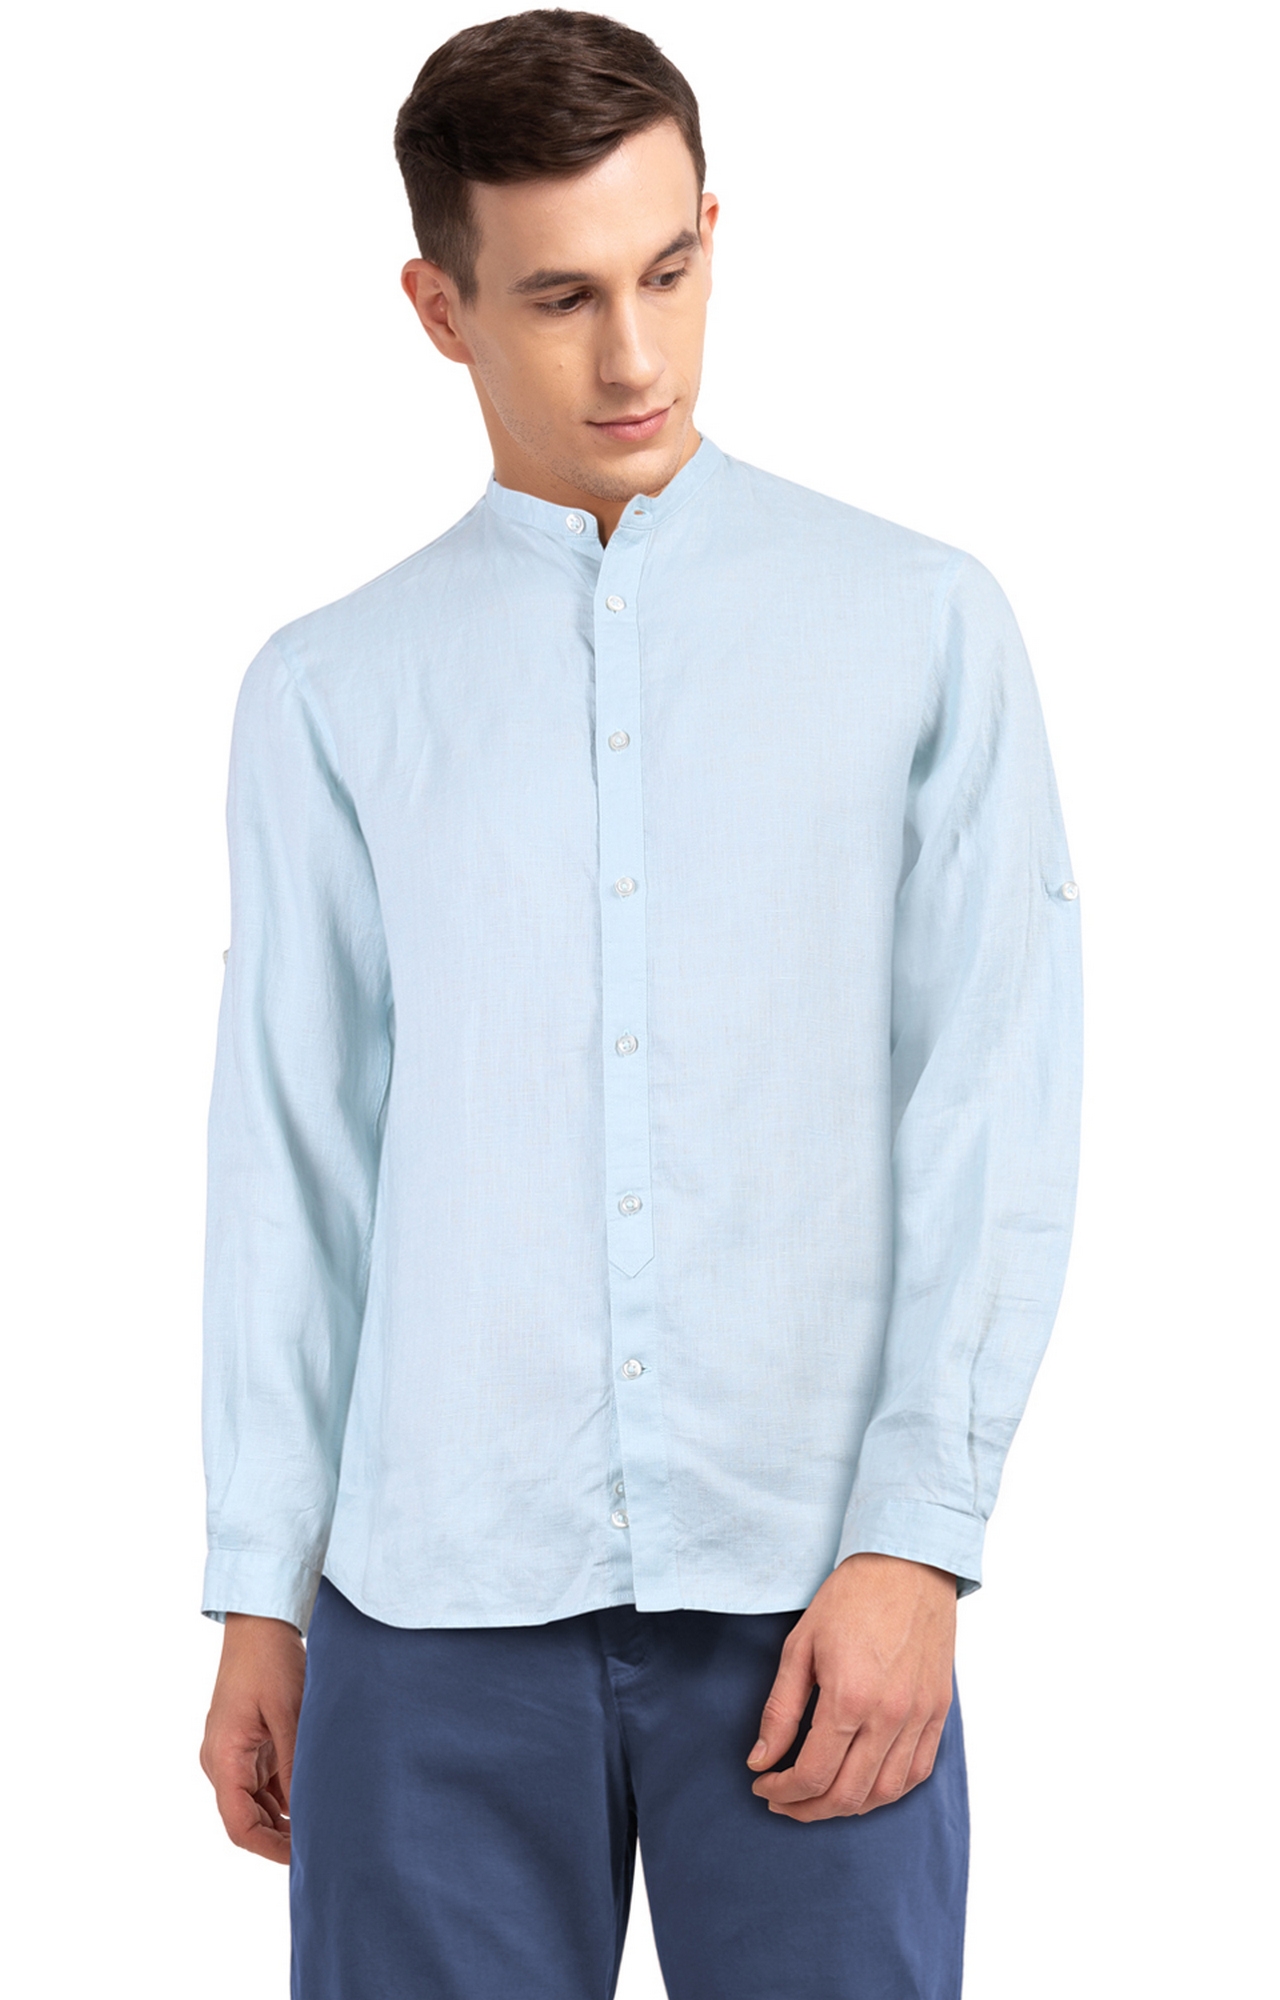 celio | Green Solid Casual Shirt